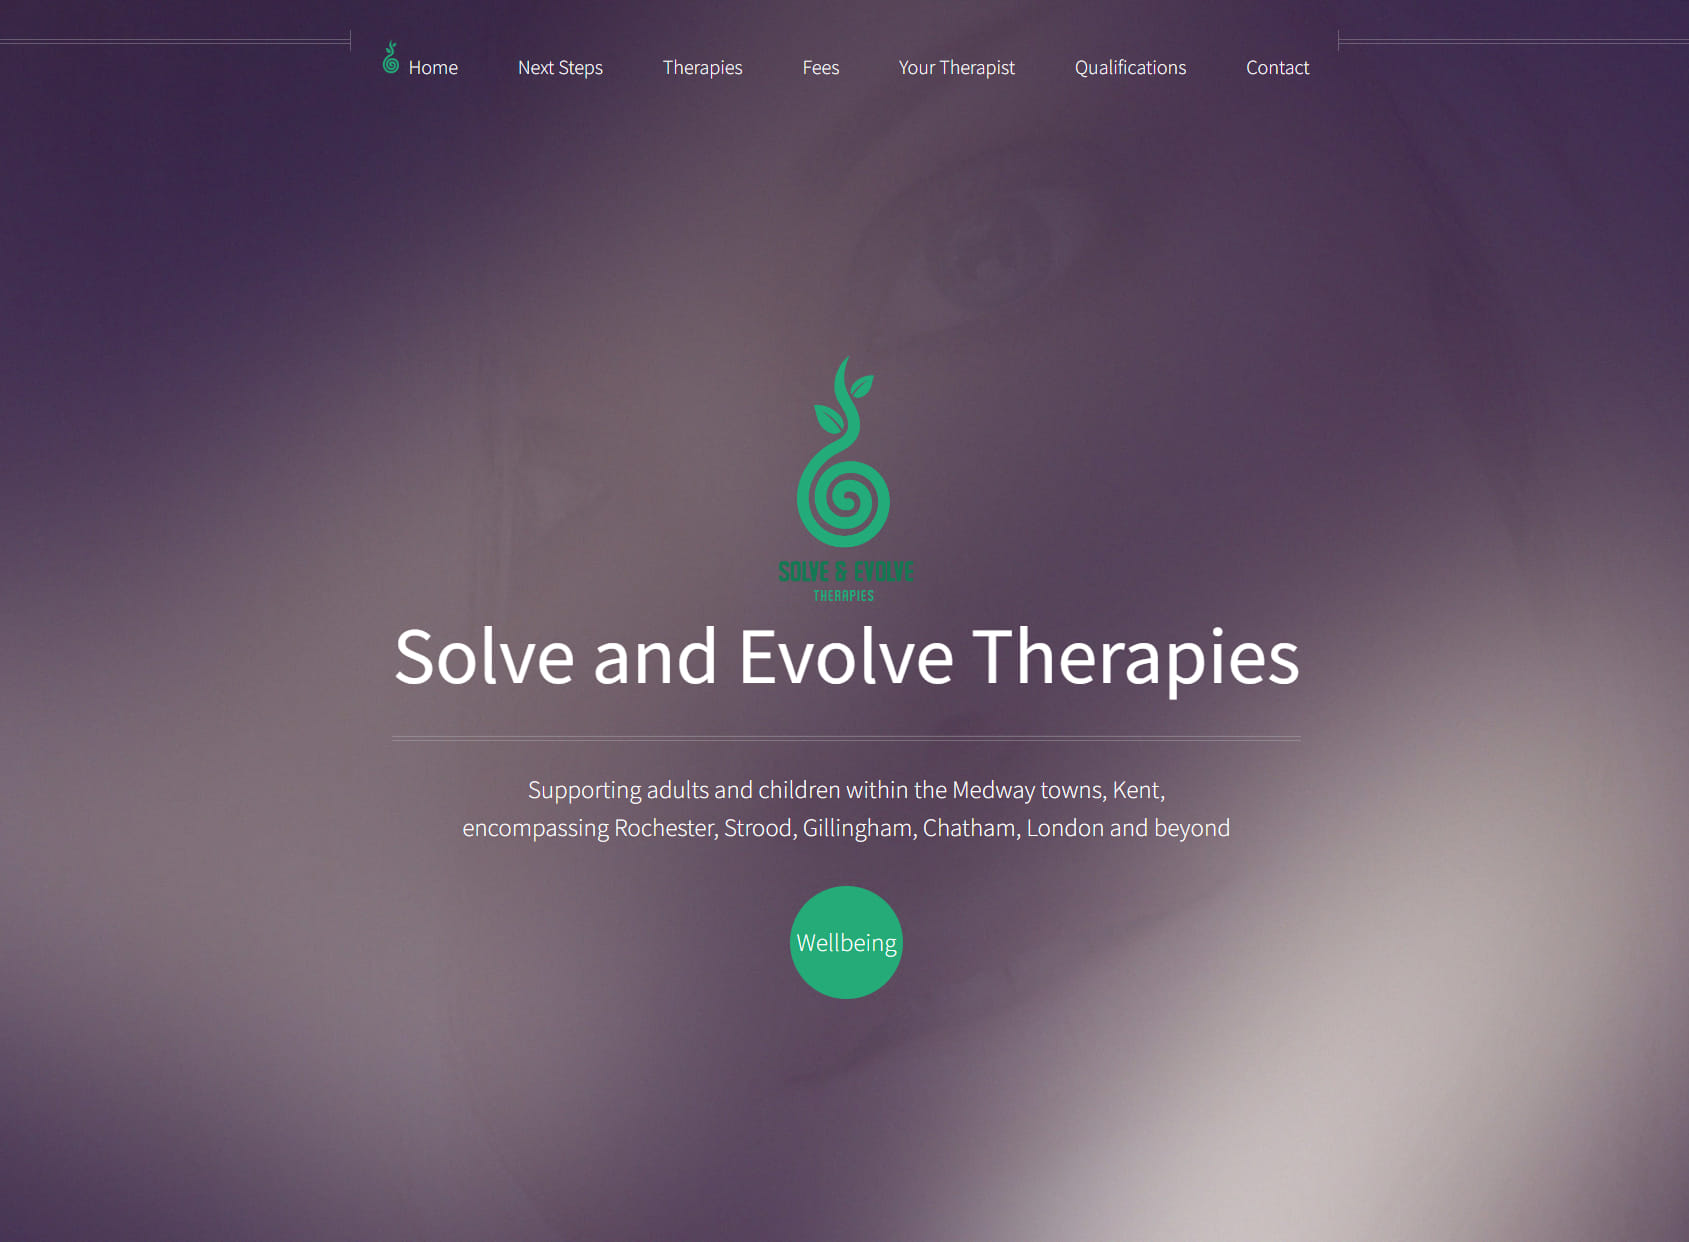 Solve and Evolve Therapies